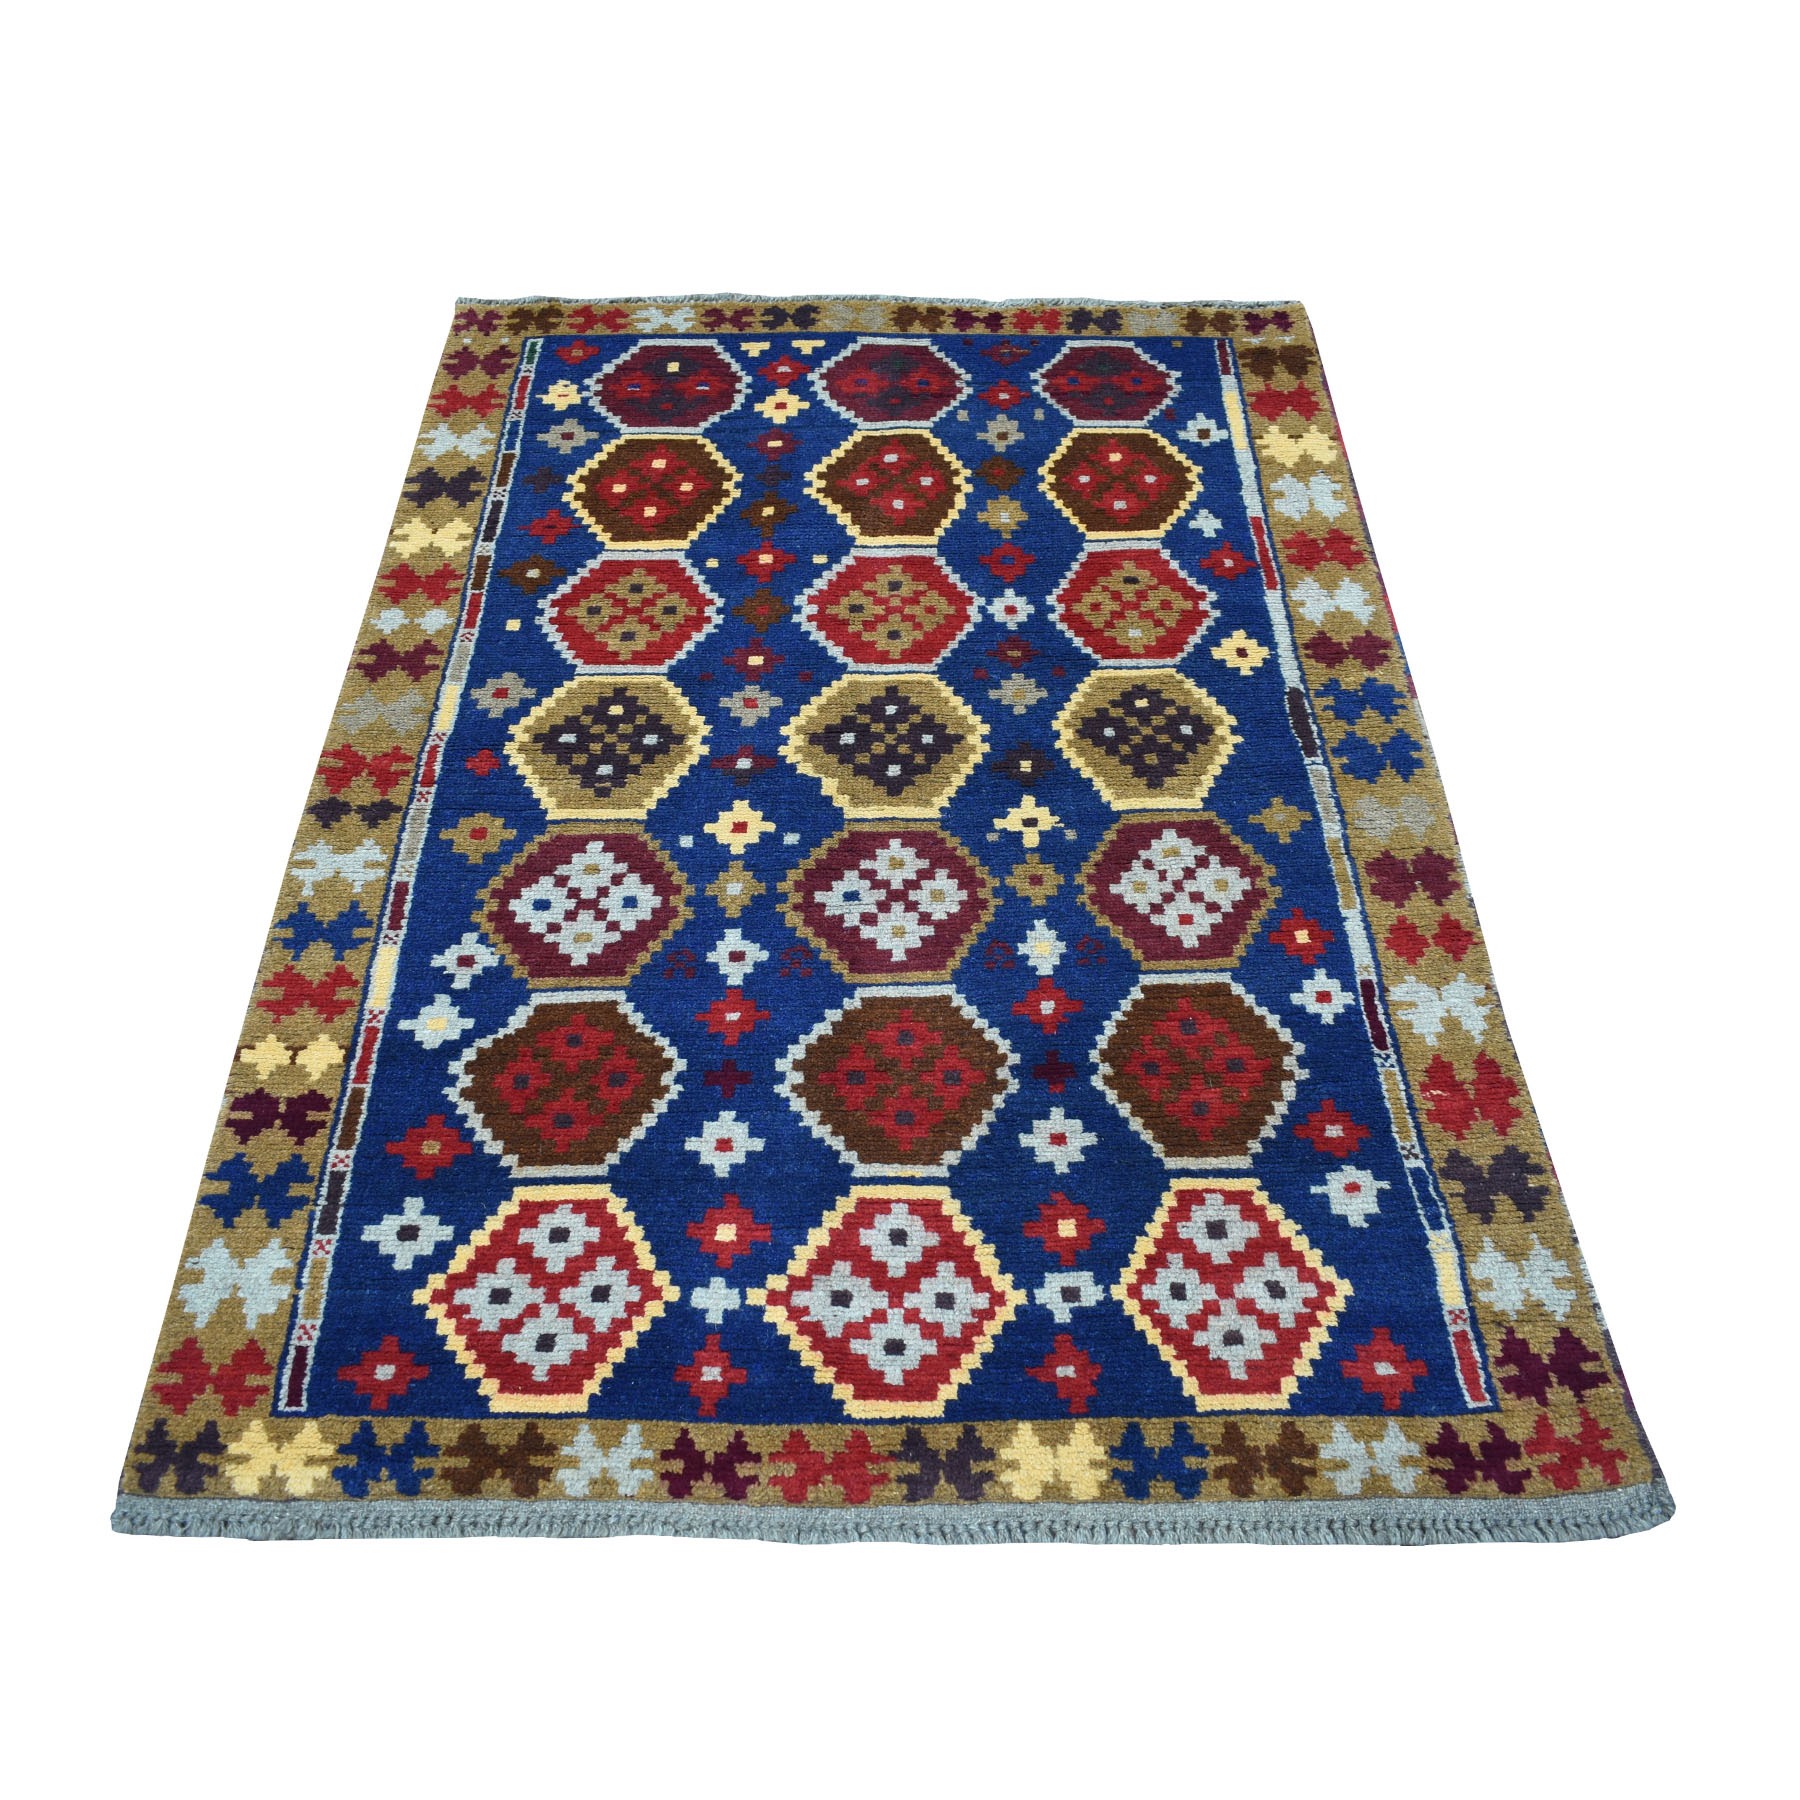 3'8"x5'9" Blue Colorful Afghan Baluch Tribal Deisgn Pure Wool Hand Woven Oriental Rug 